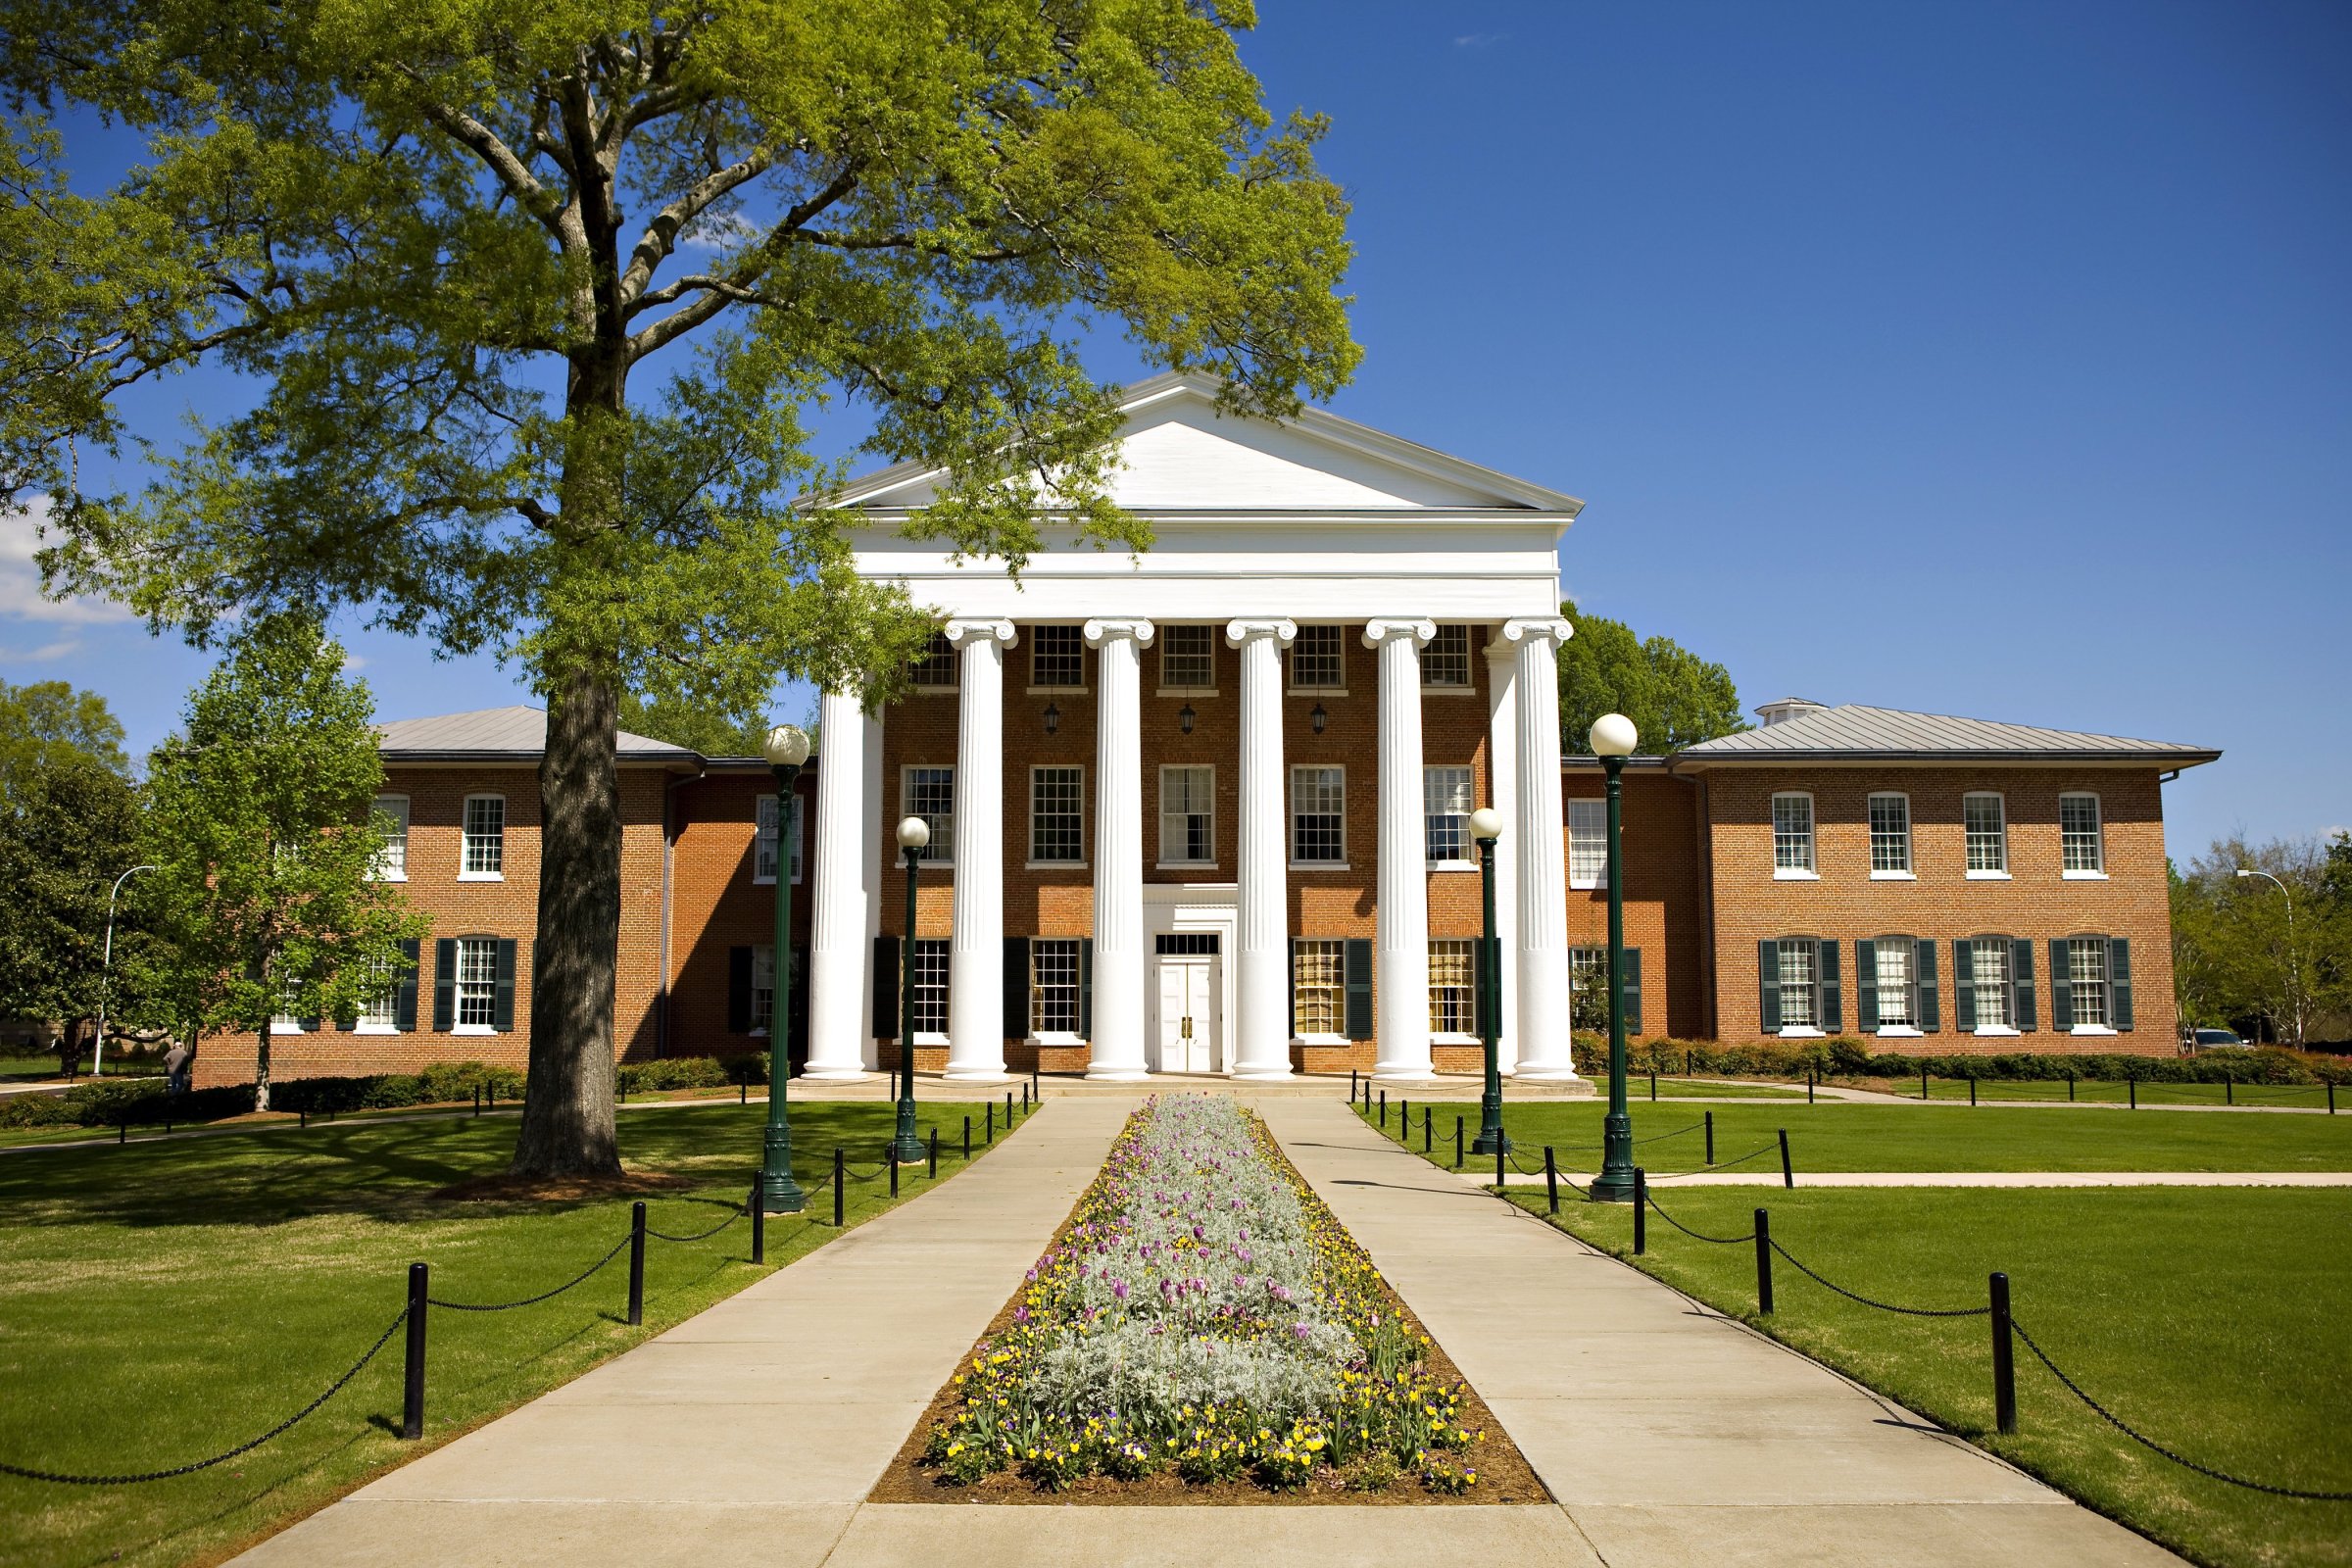 The Lyceum, oldest building on the campus of the University of Mississippi on April 12, 2008 in Oxford, Mississippi.